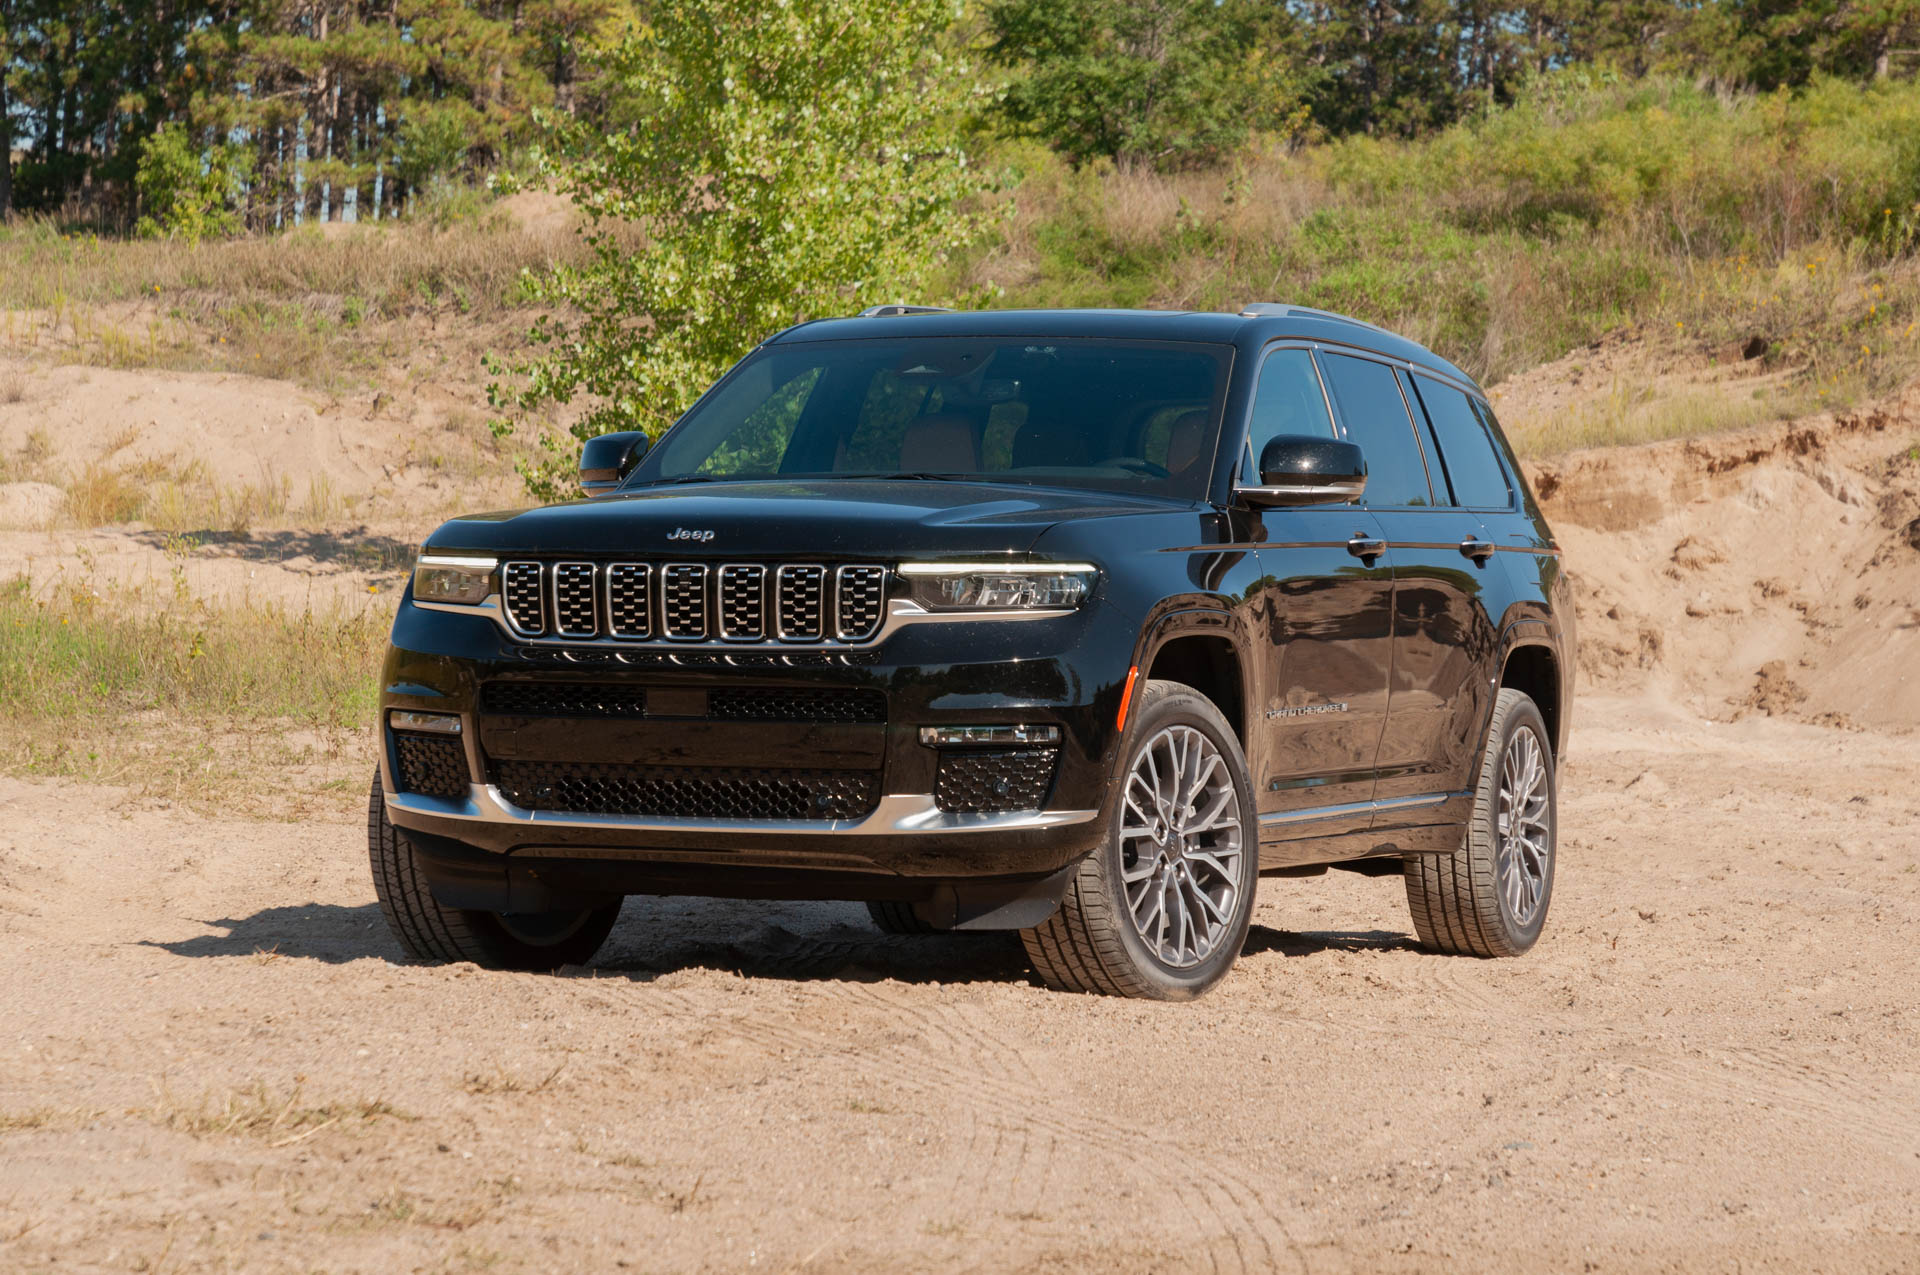 Car review: 2021 Jeep Grand Cherokee L Overland